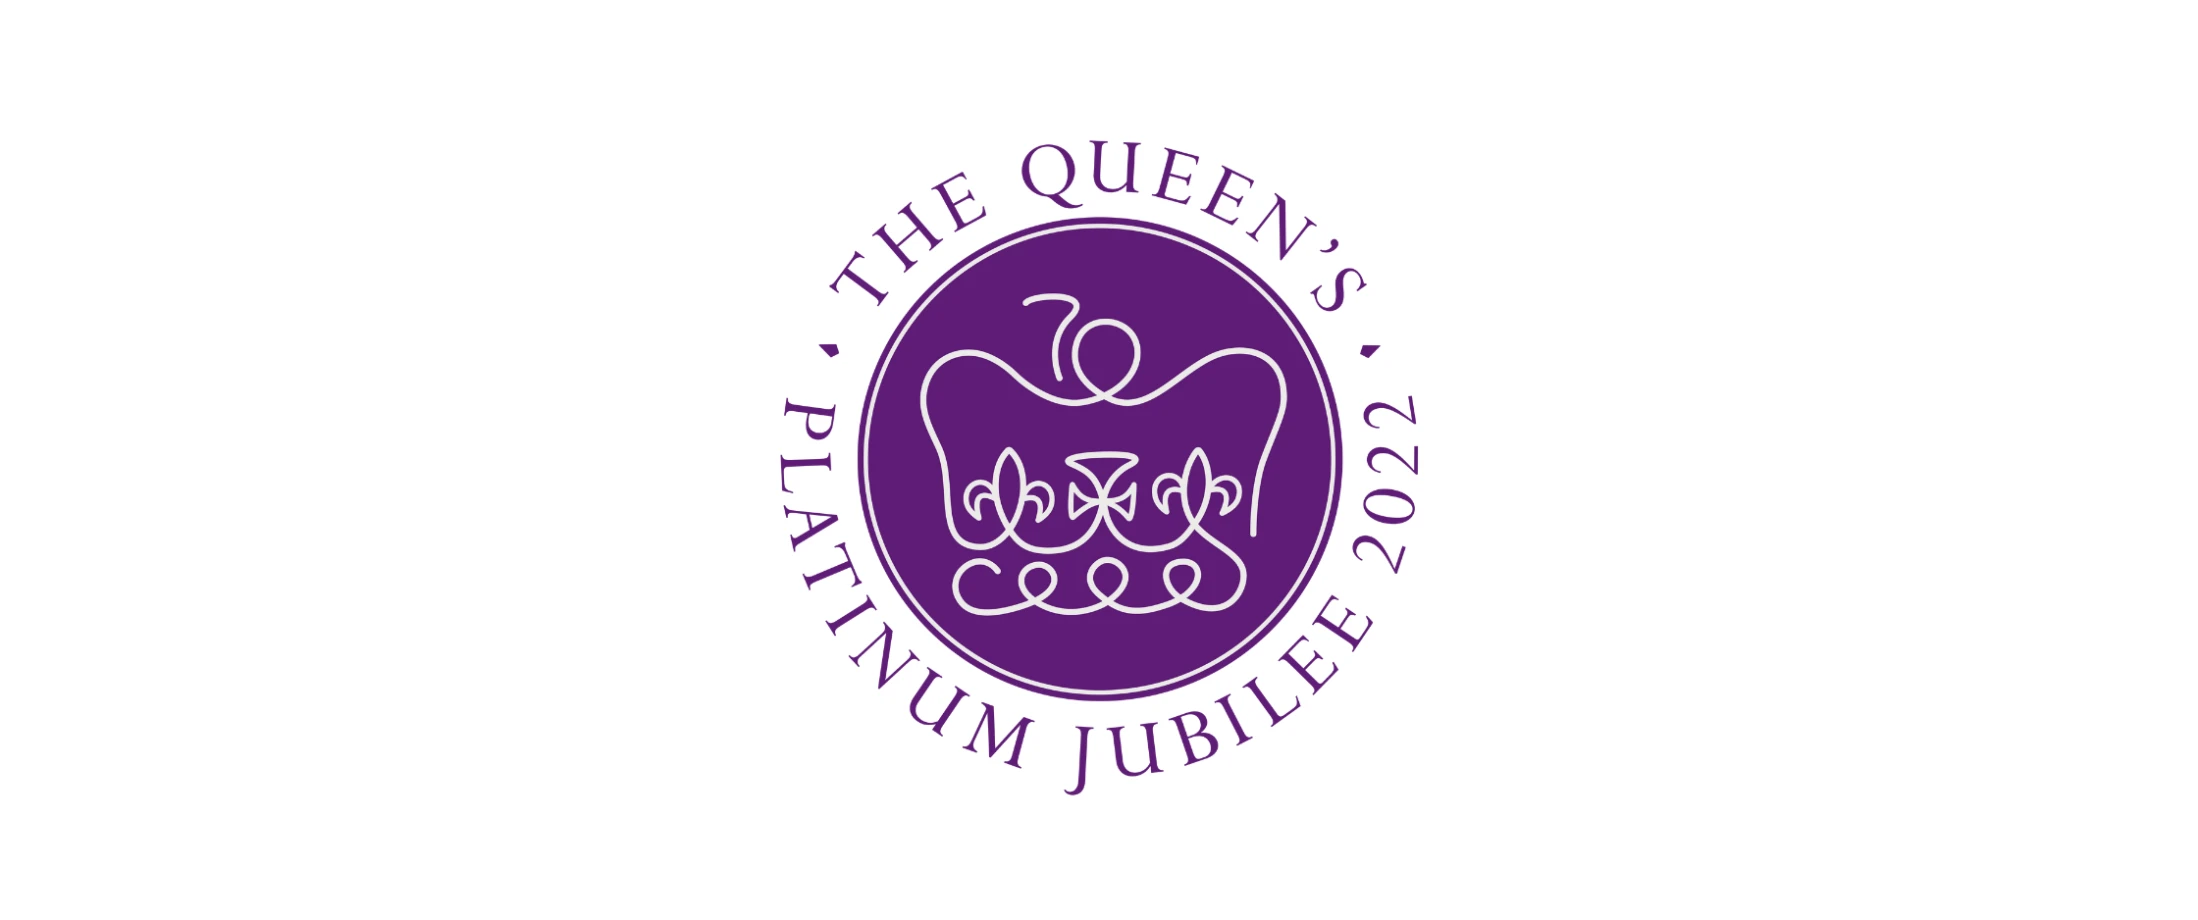 Church of Ireland Resources for Platinum Jubilee